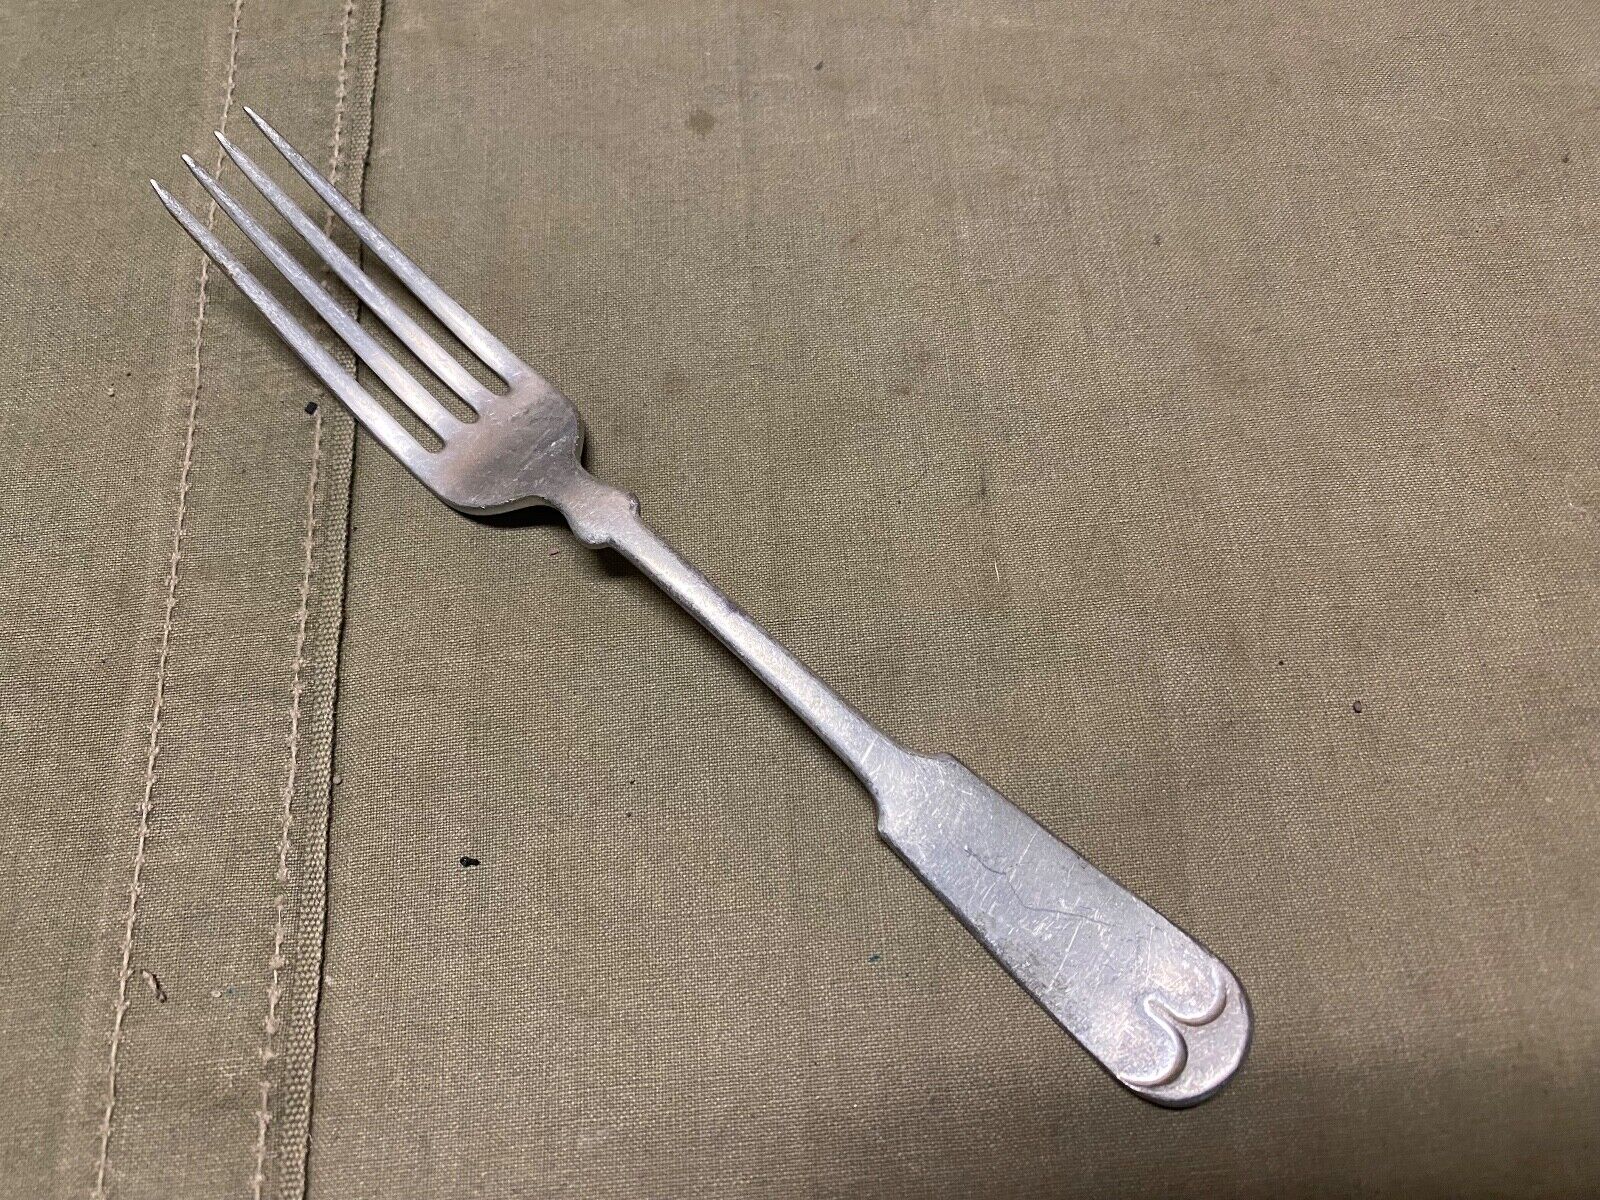 ORIGINAL PRE WWI US ARMY MESS KIT FORK- DATED 1900